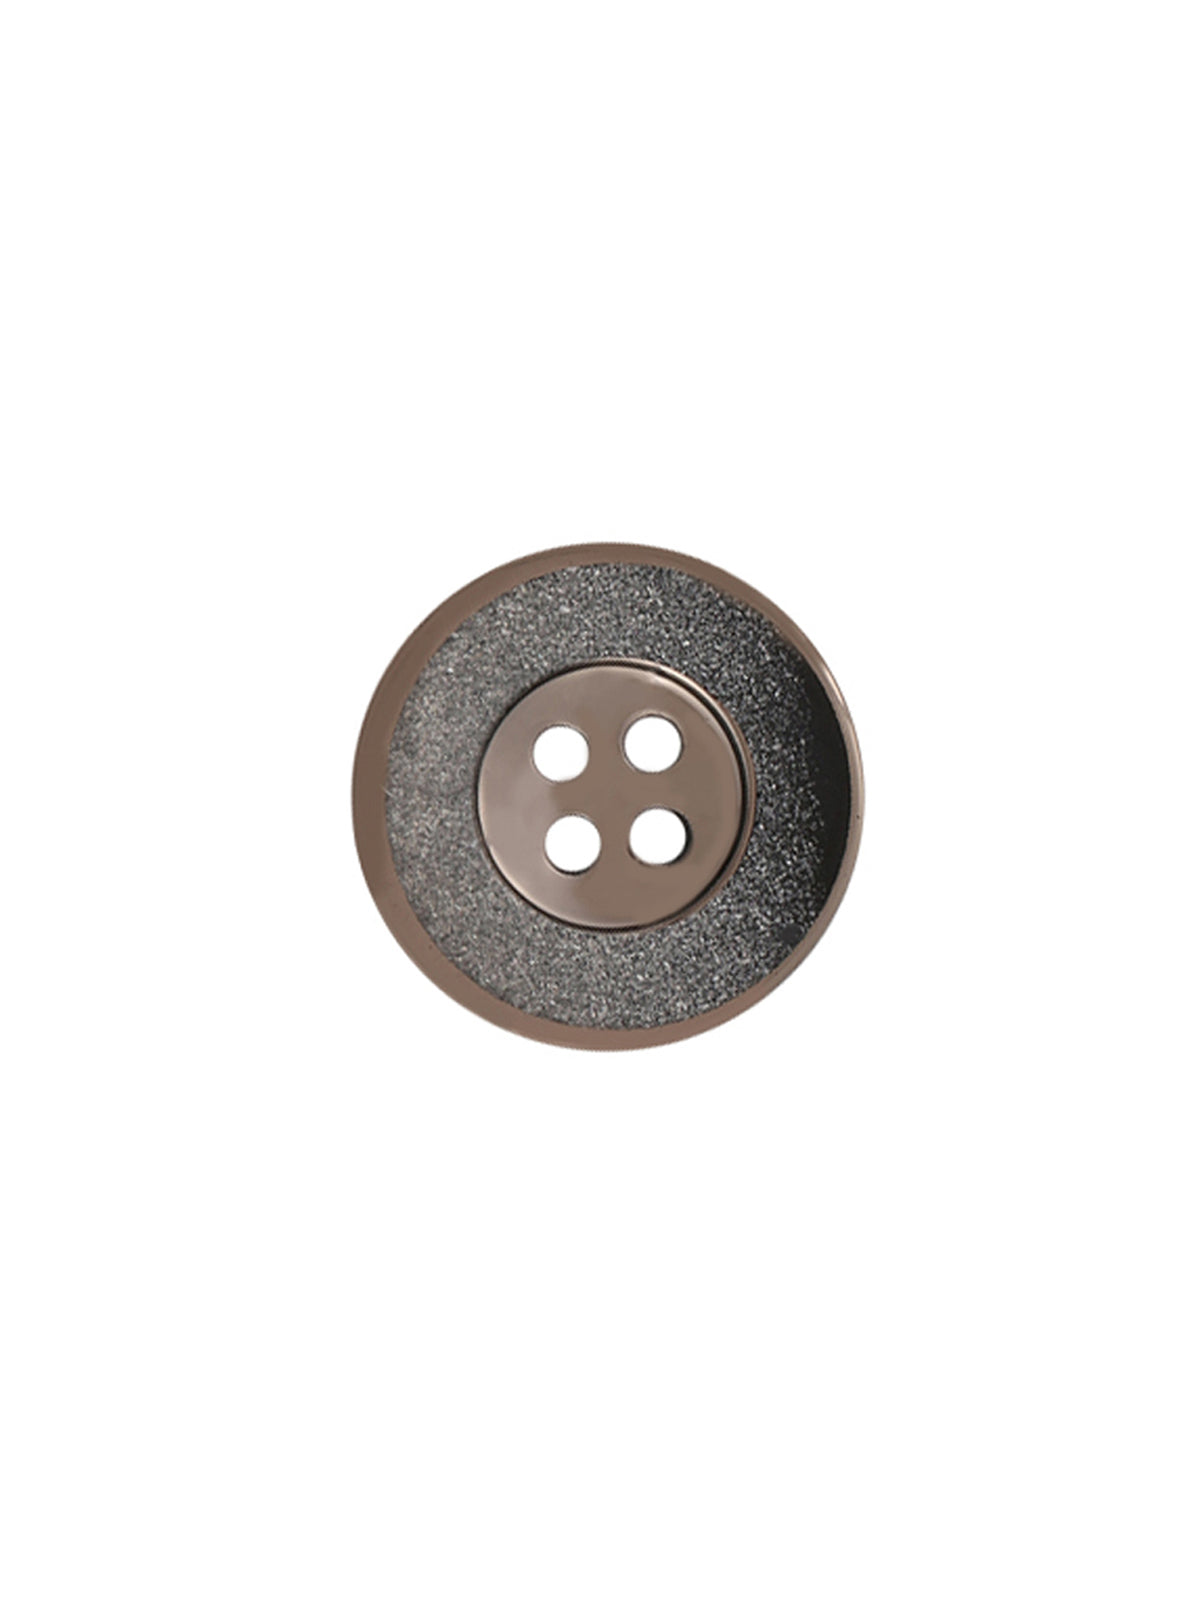 Fancy Rounded Rim 4-Hole Coat Button in Black Nickel (Gunmetal) with Silver Color